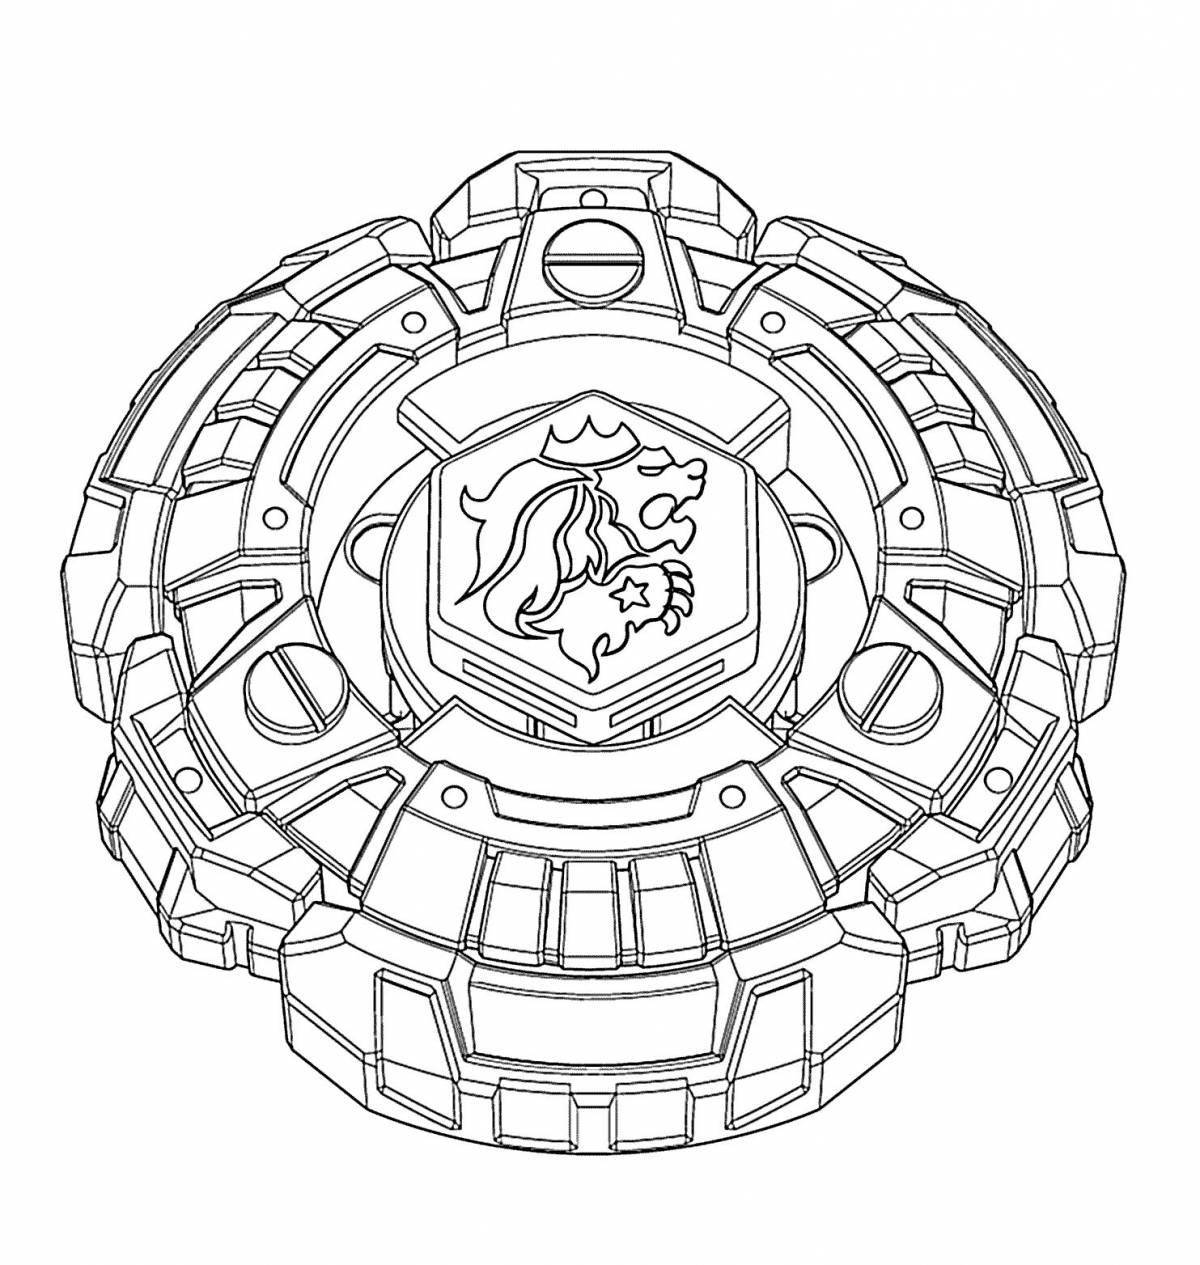 Colorful beyblade burst coloring page